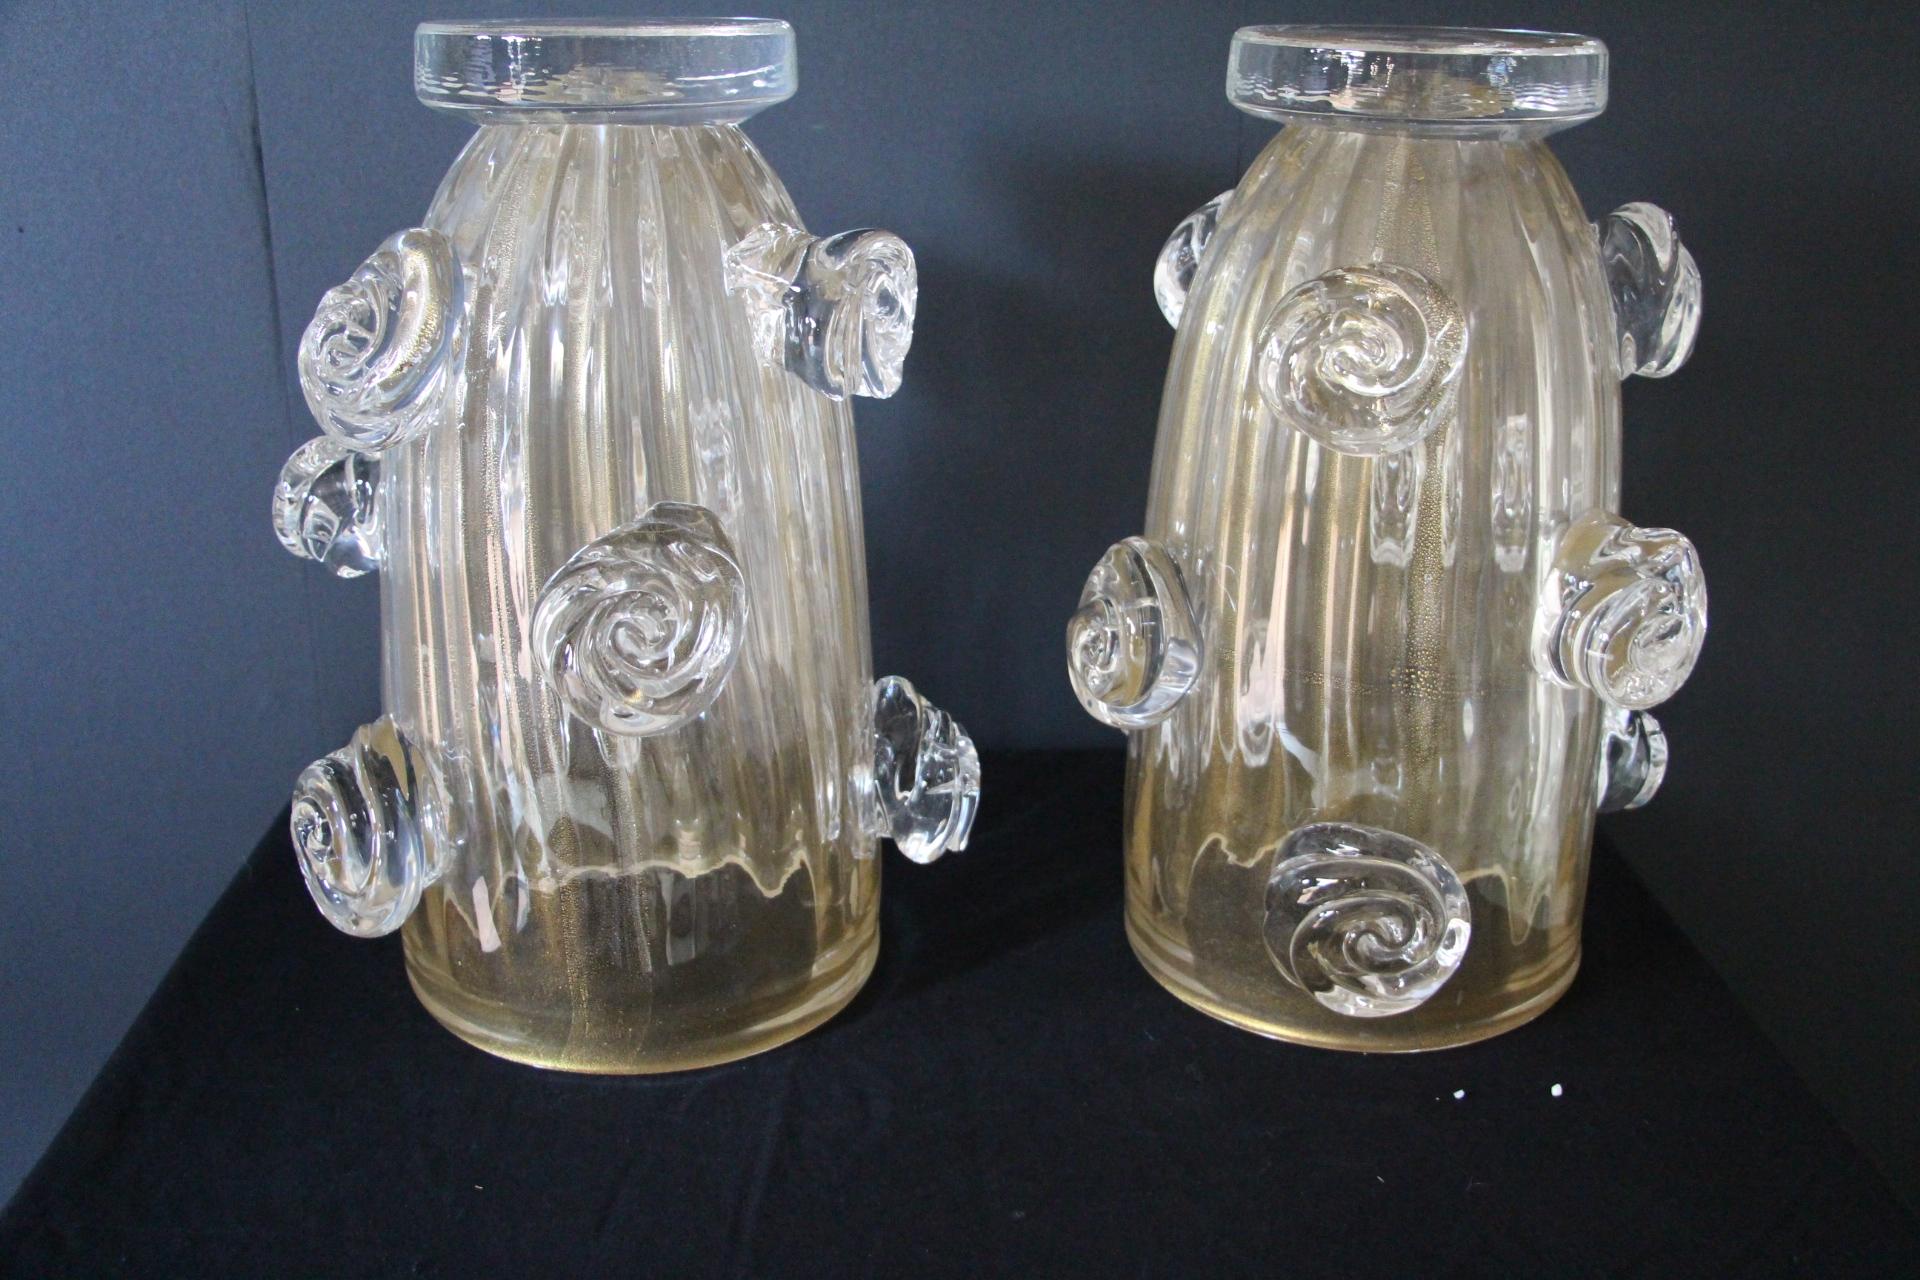 Pair of Large Golden Murano Glass Vases With Roses Decor by Costantini 10